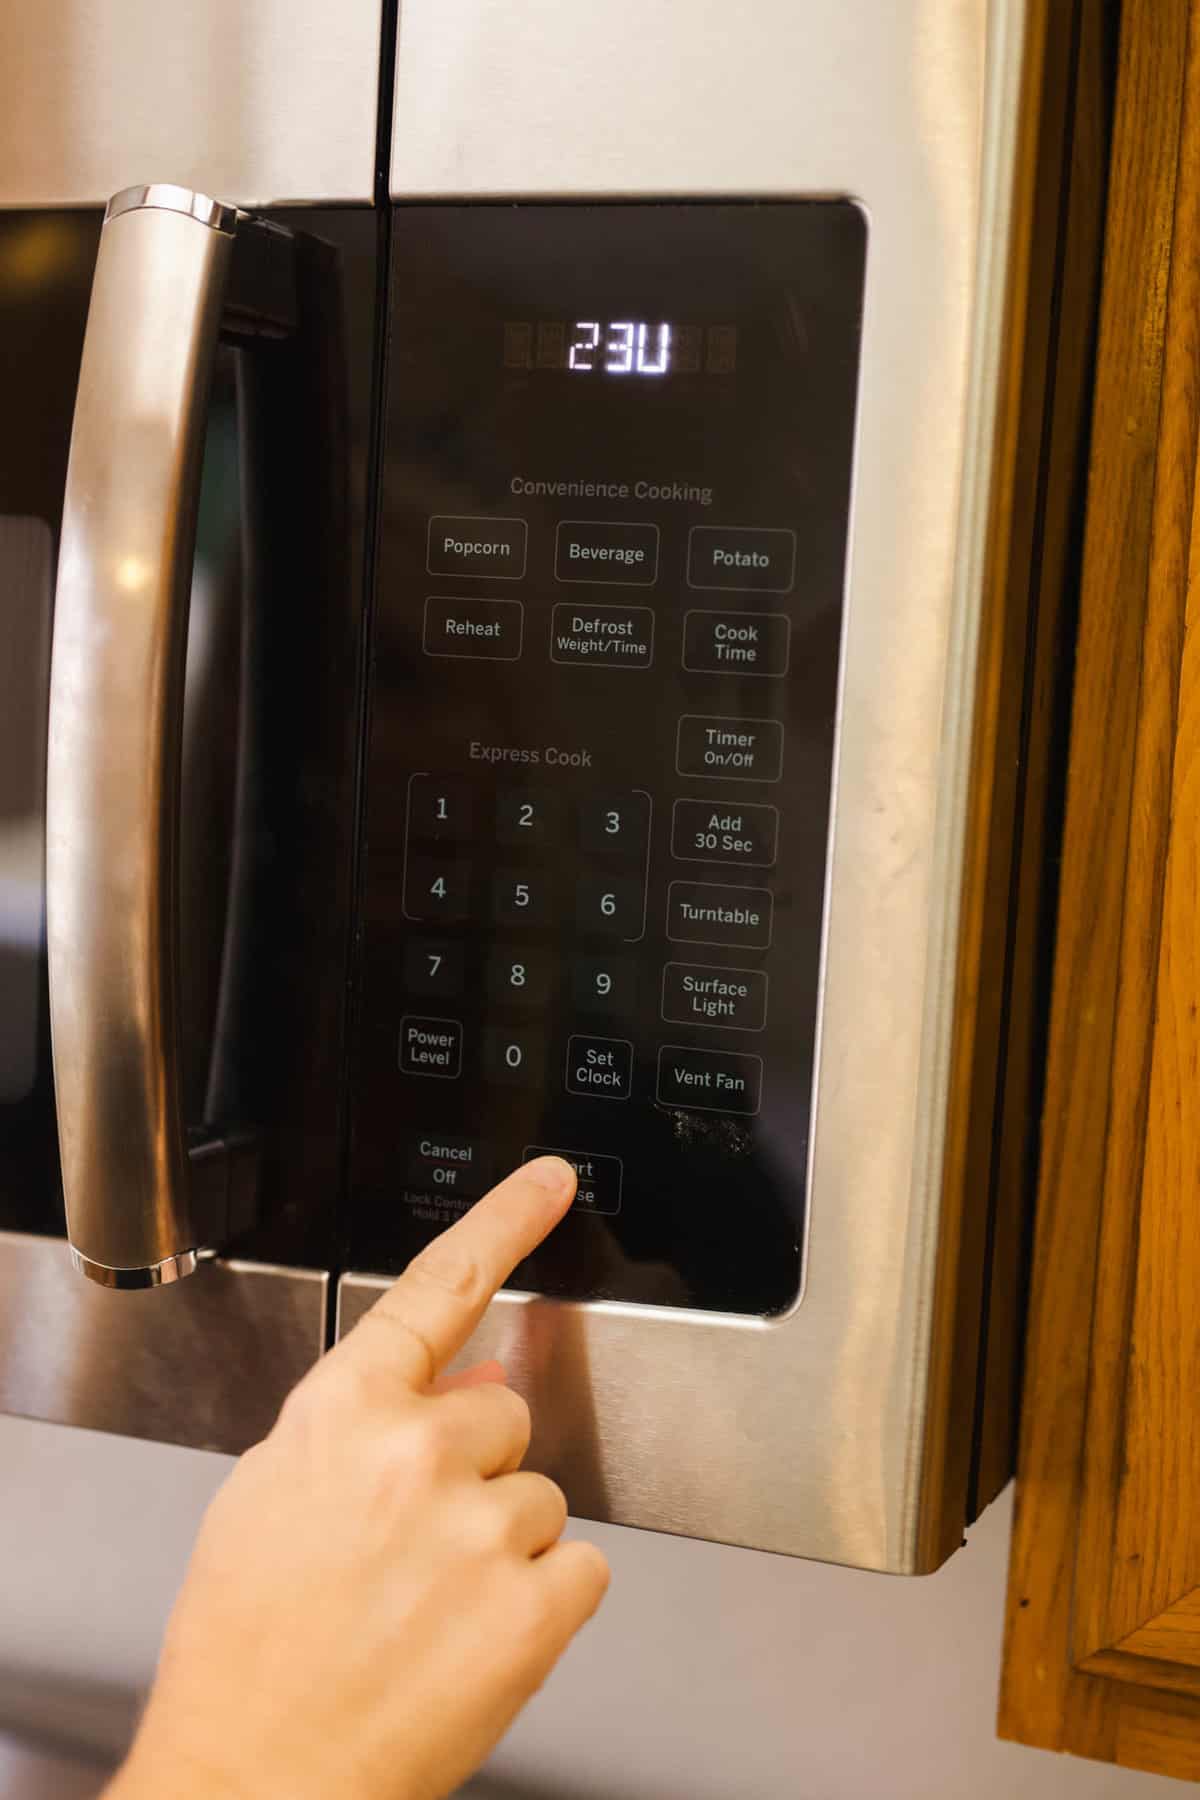 Hand pushing buttons on a microwave.